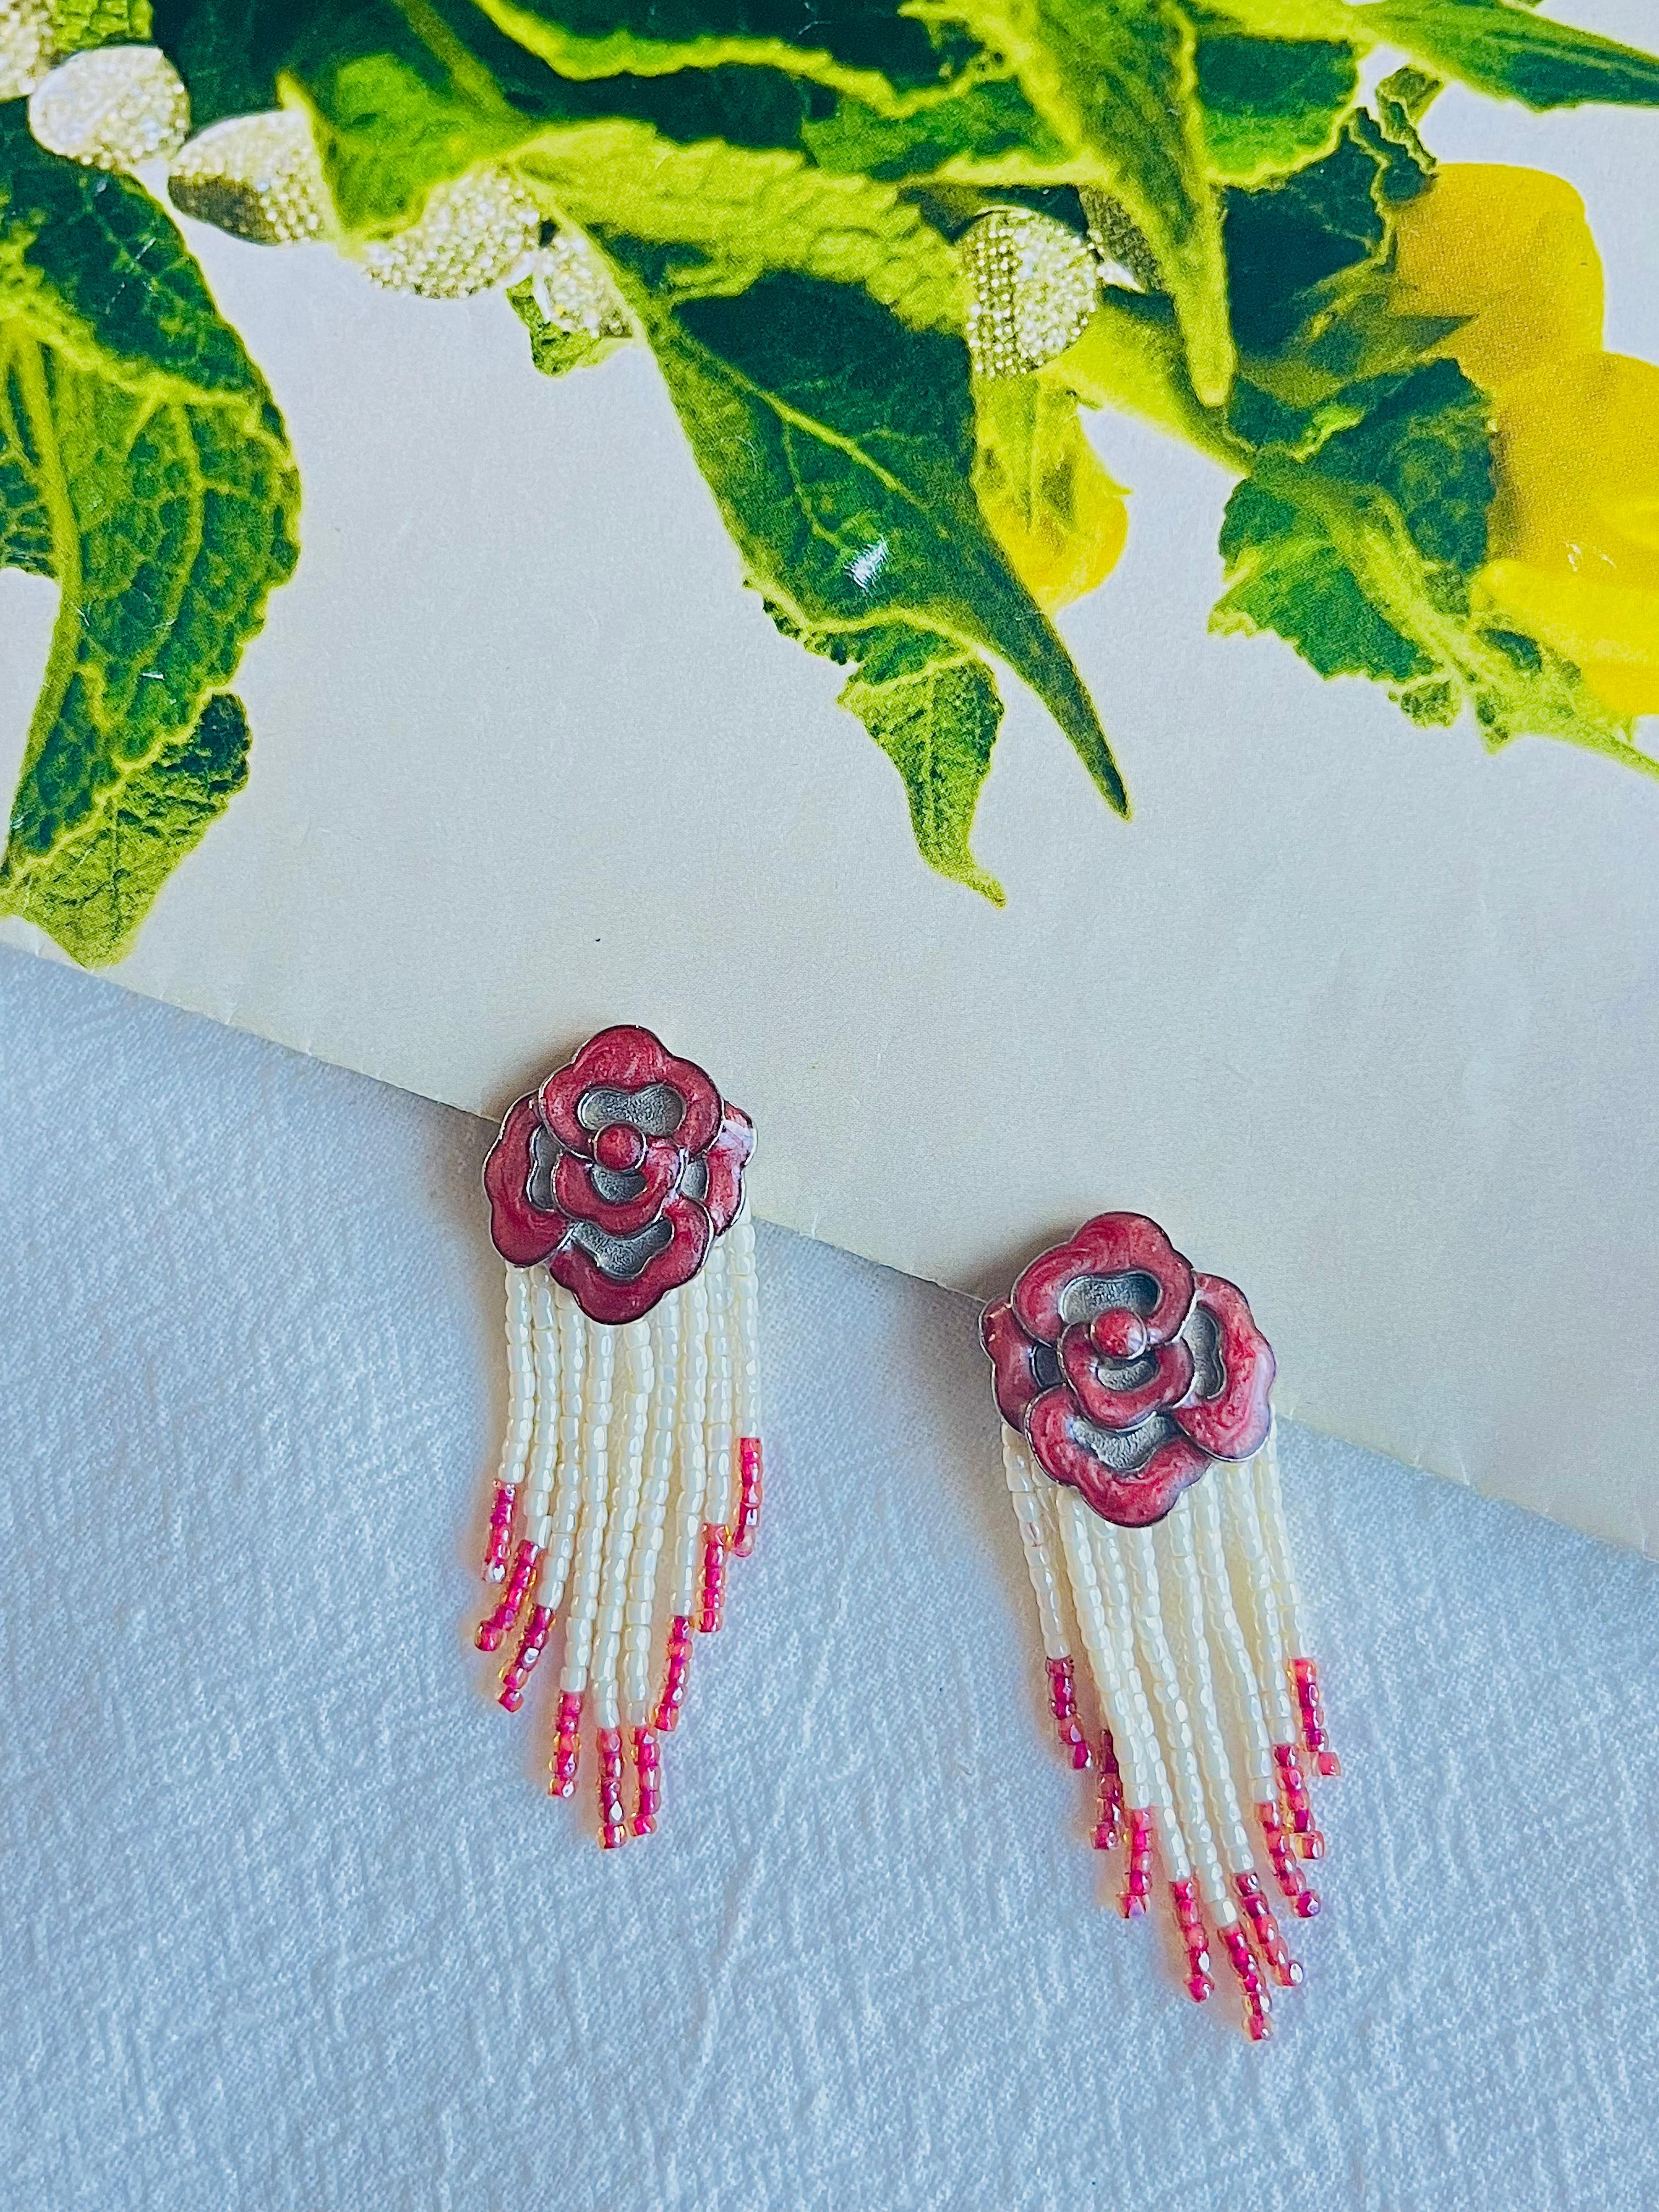 Christian Dior 1960s Burgundy Rose Beaded Pearls Crystals Tassel Drop Earrings In Excellent Condition For Sale In Wokingham, England